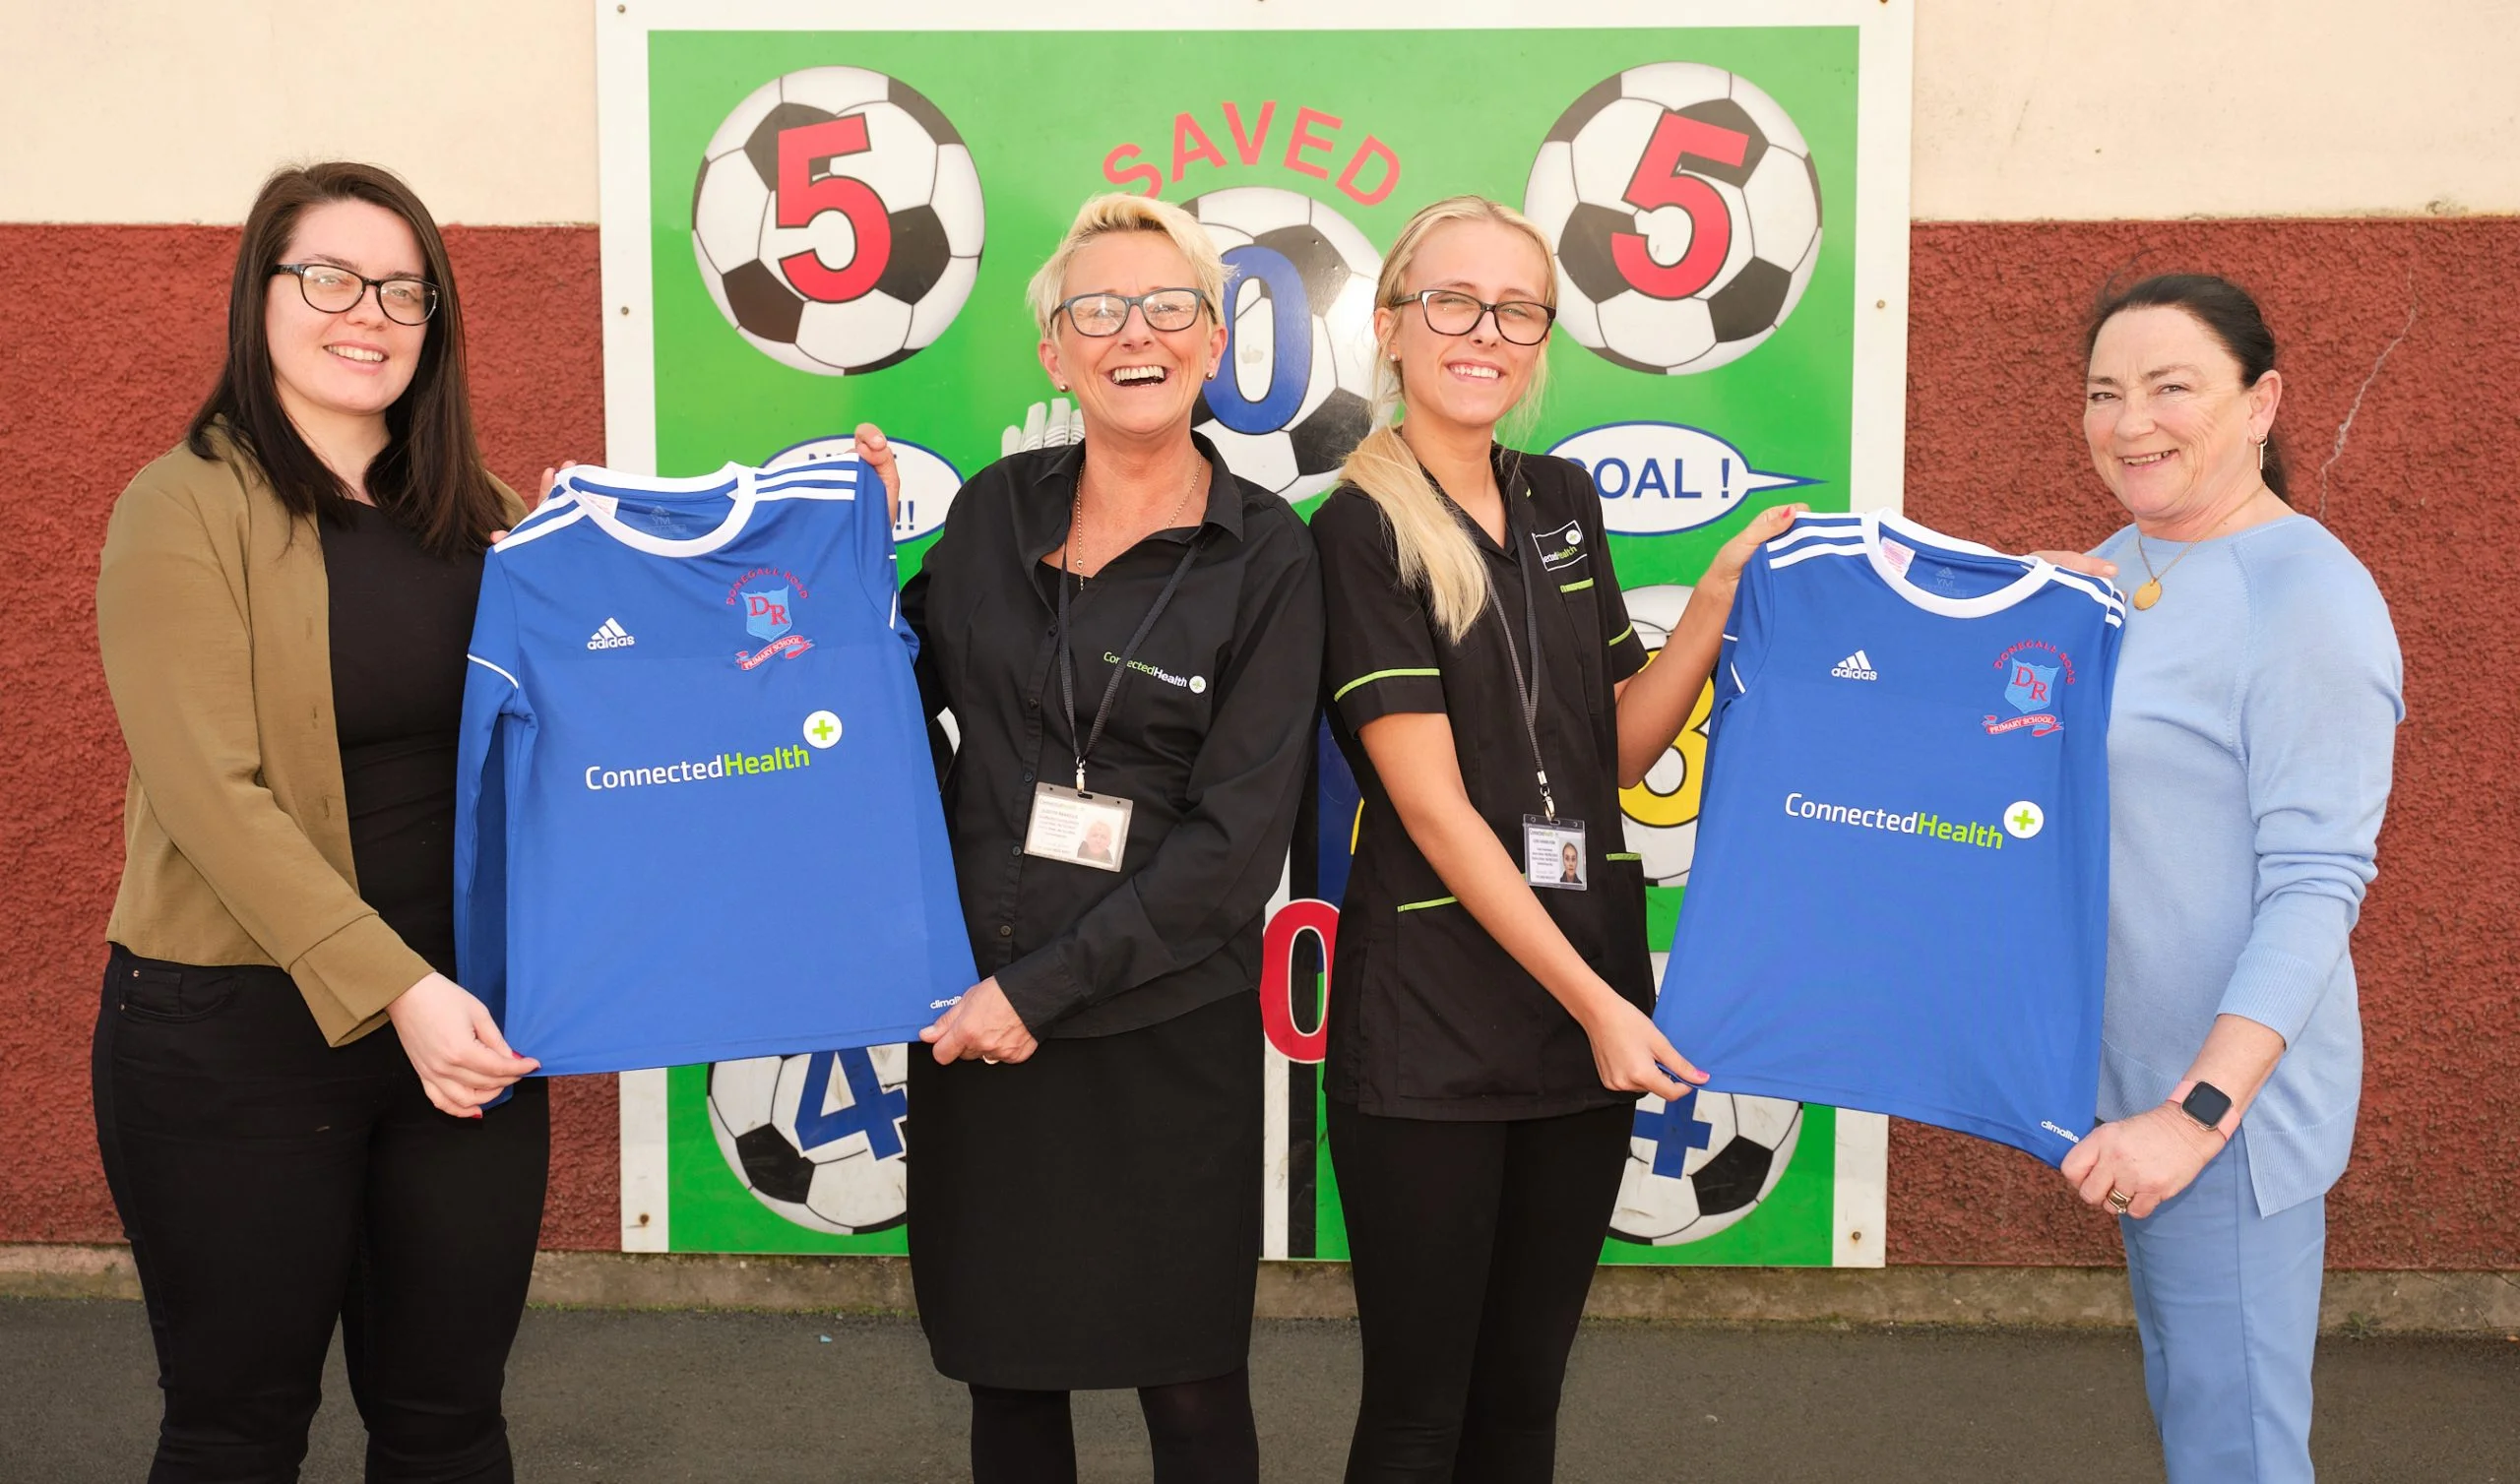 Local Team Unveil Connected Health as Sponsor